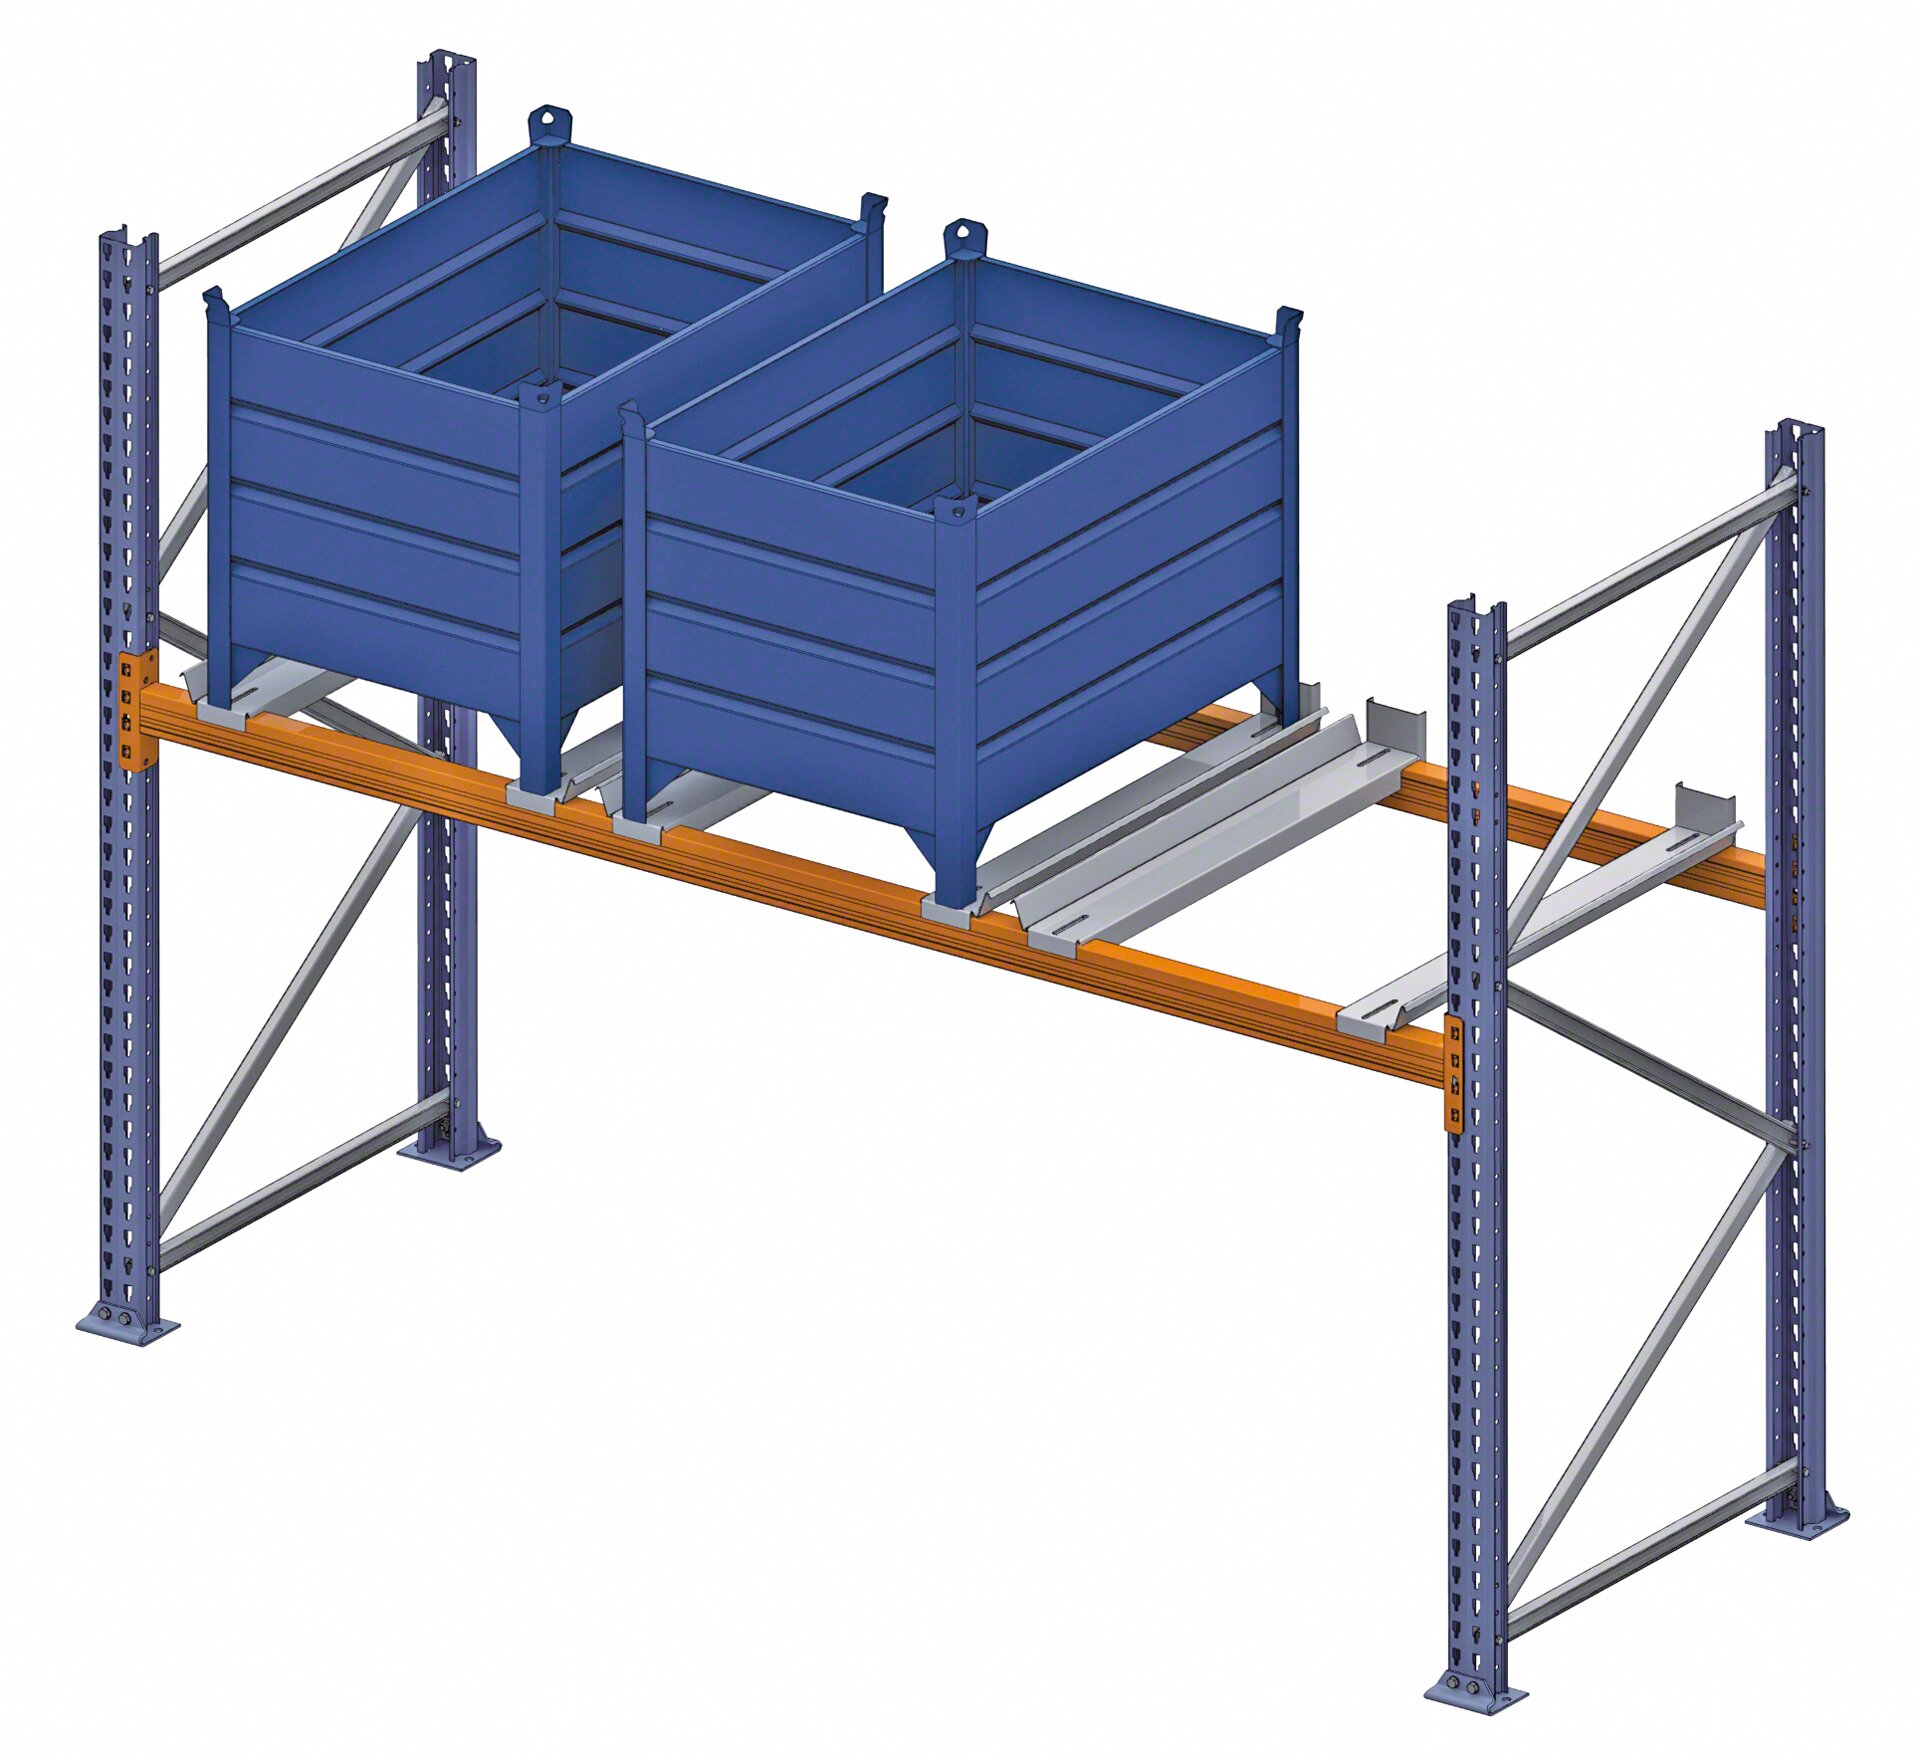 Special crossties for containers so pallets are not needed